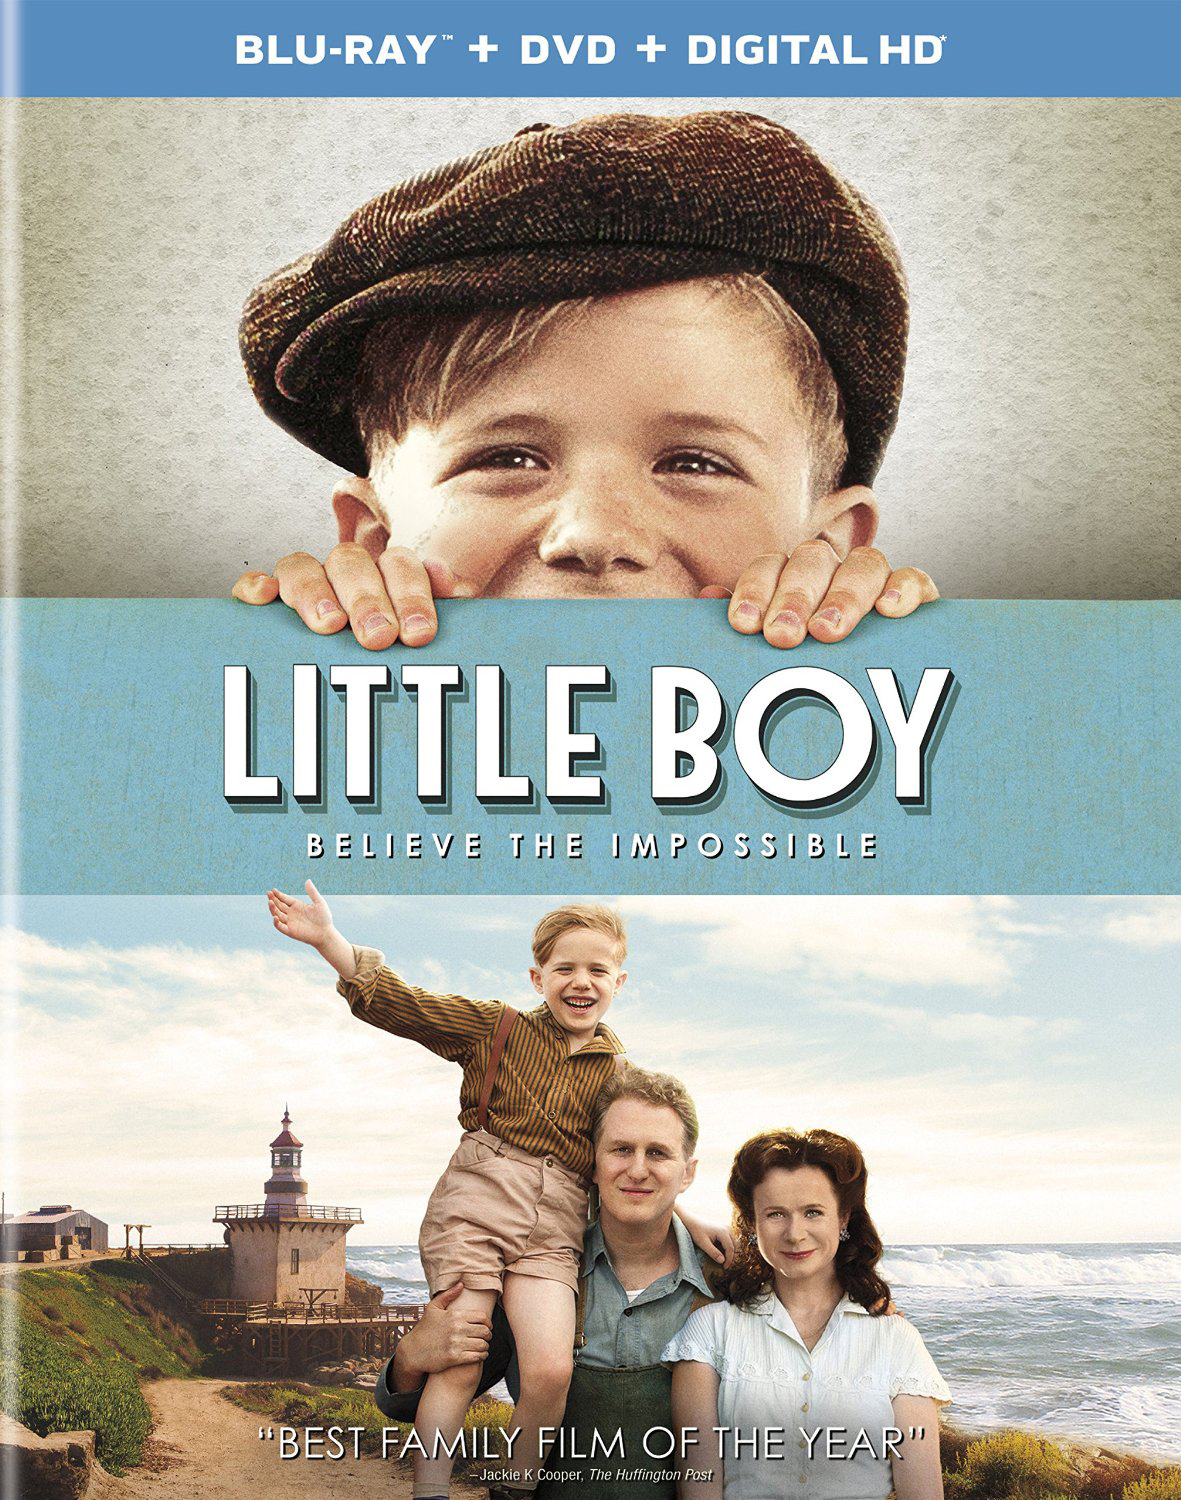 Little Boy - Blu-Ray Movie Review